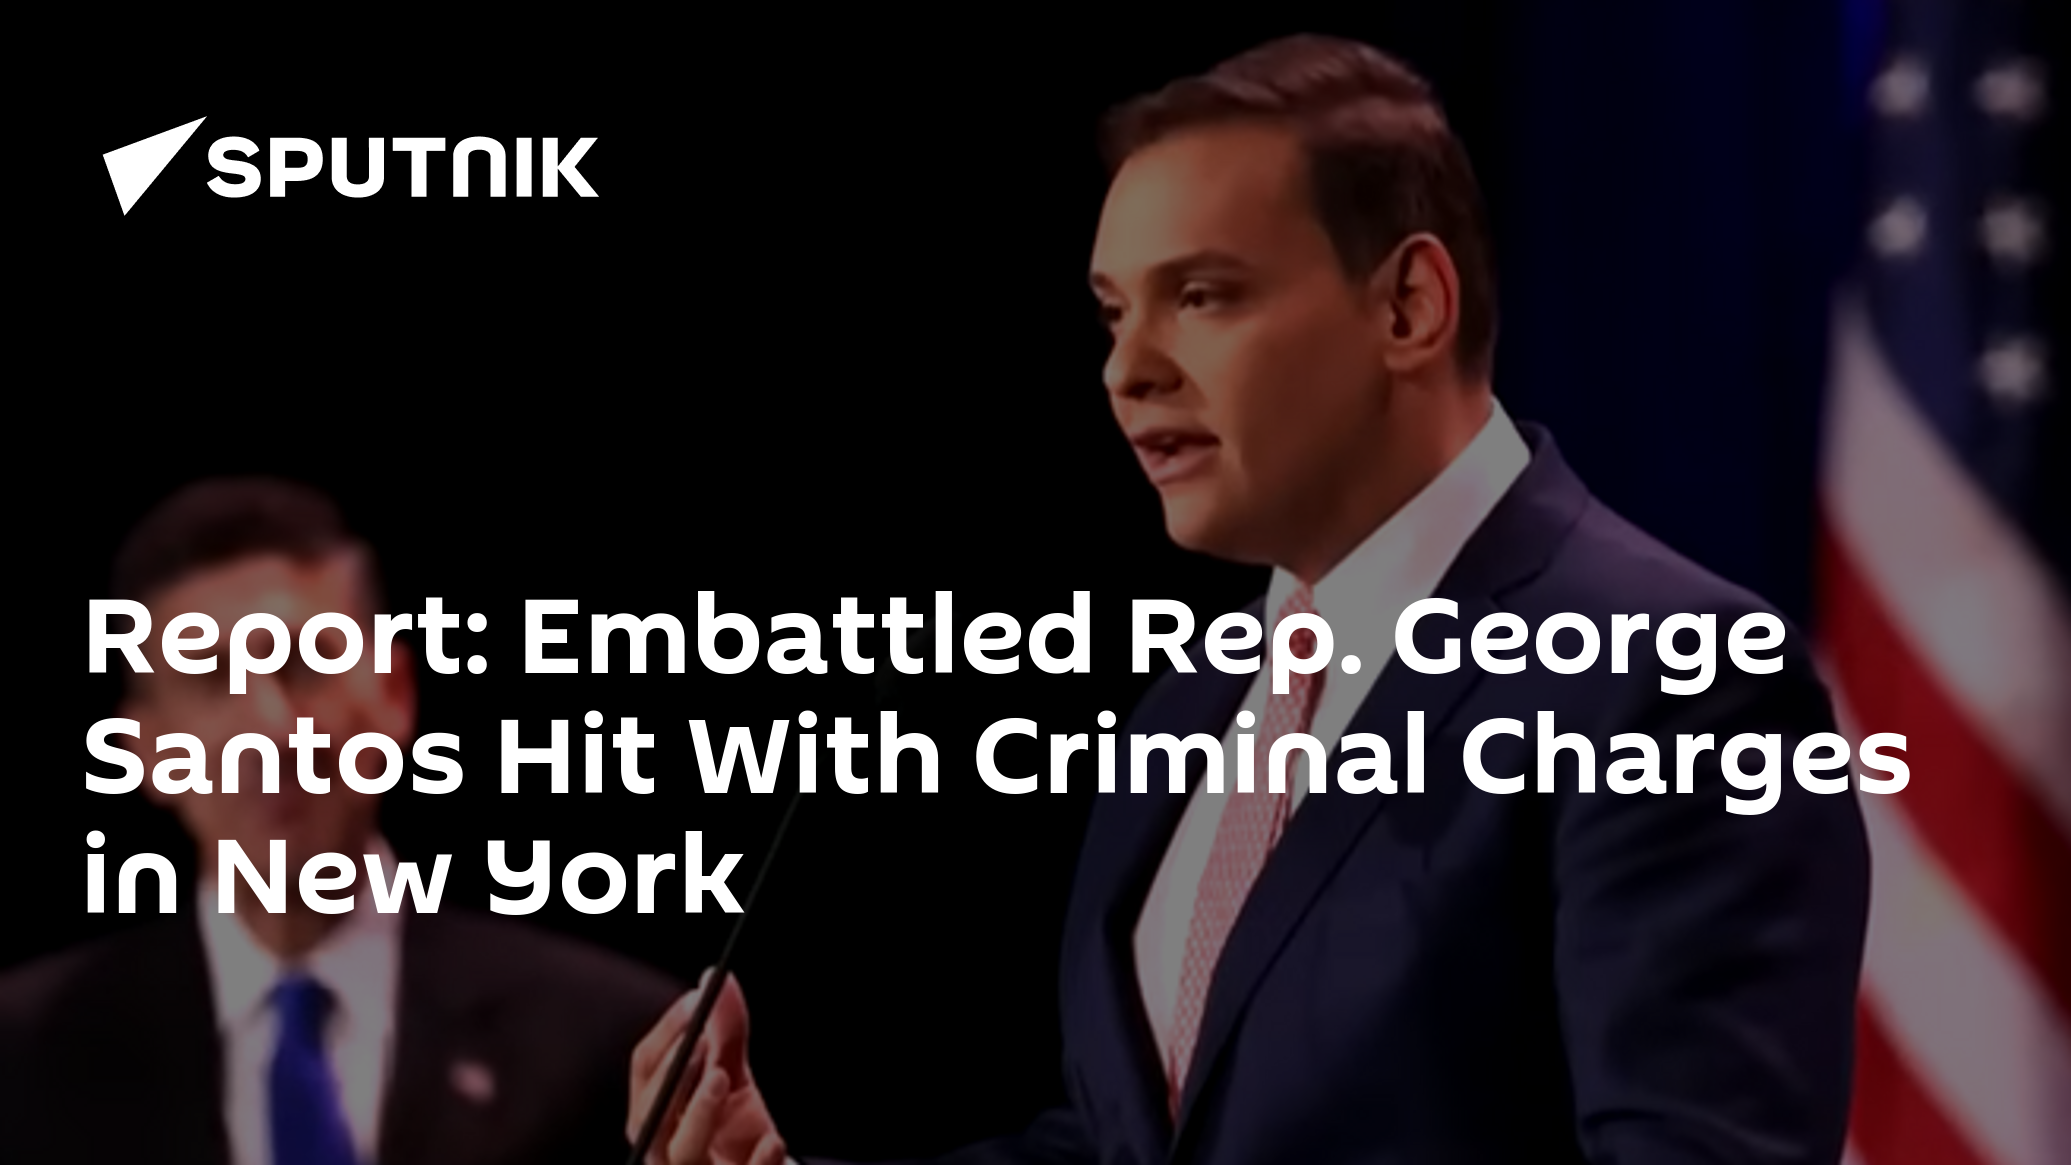 Report: Embattled Rep. George Santos Hit With Criminal Charges in New York